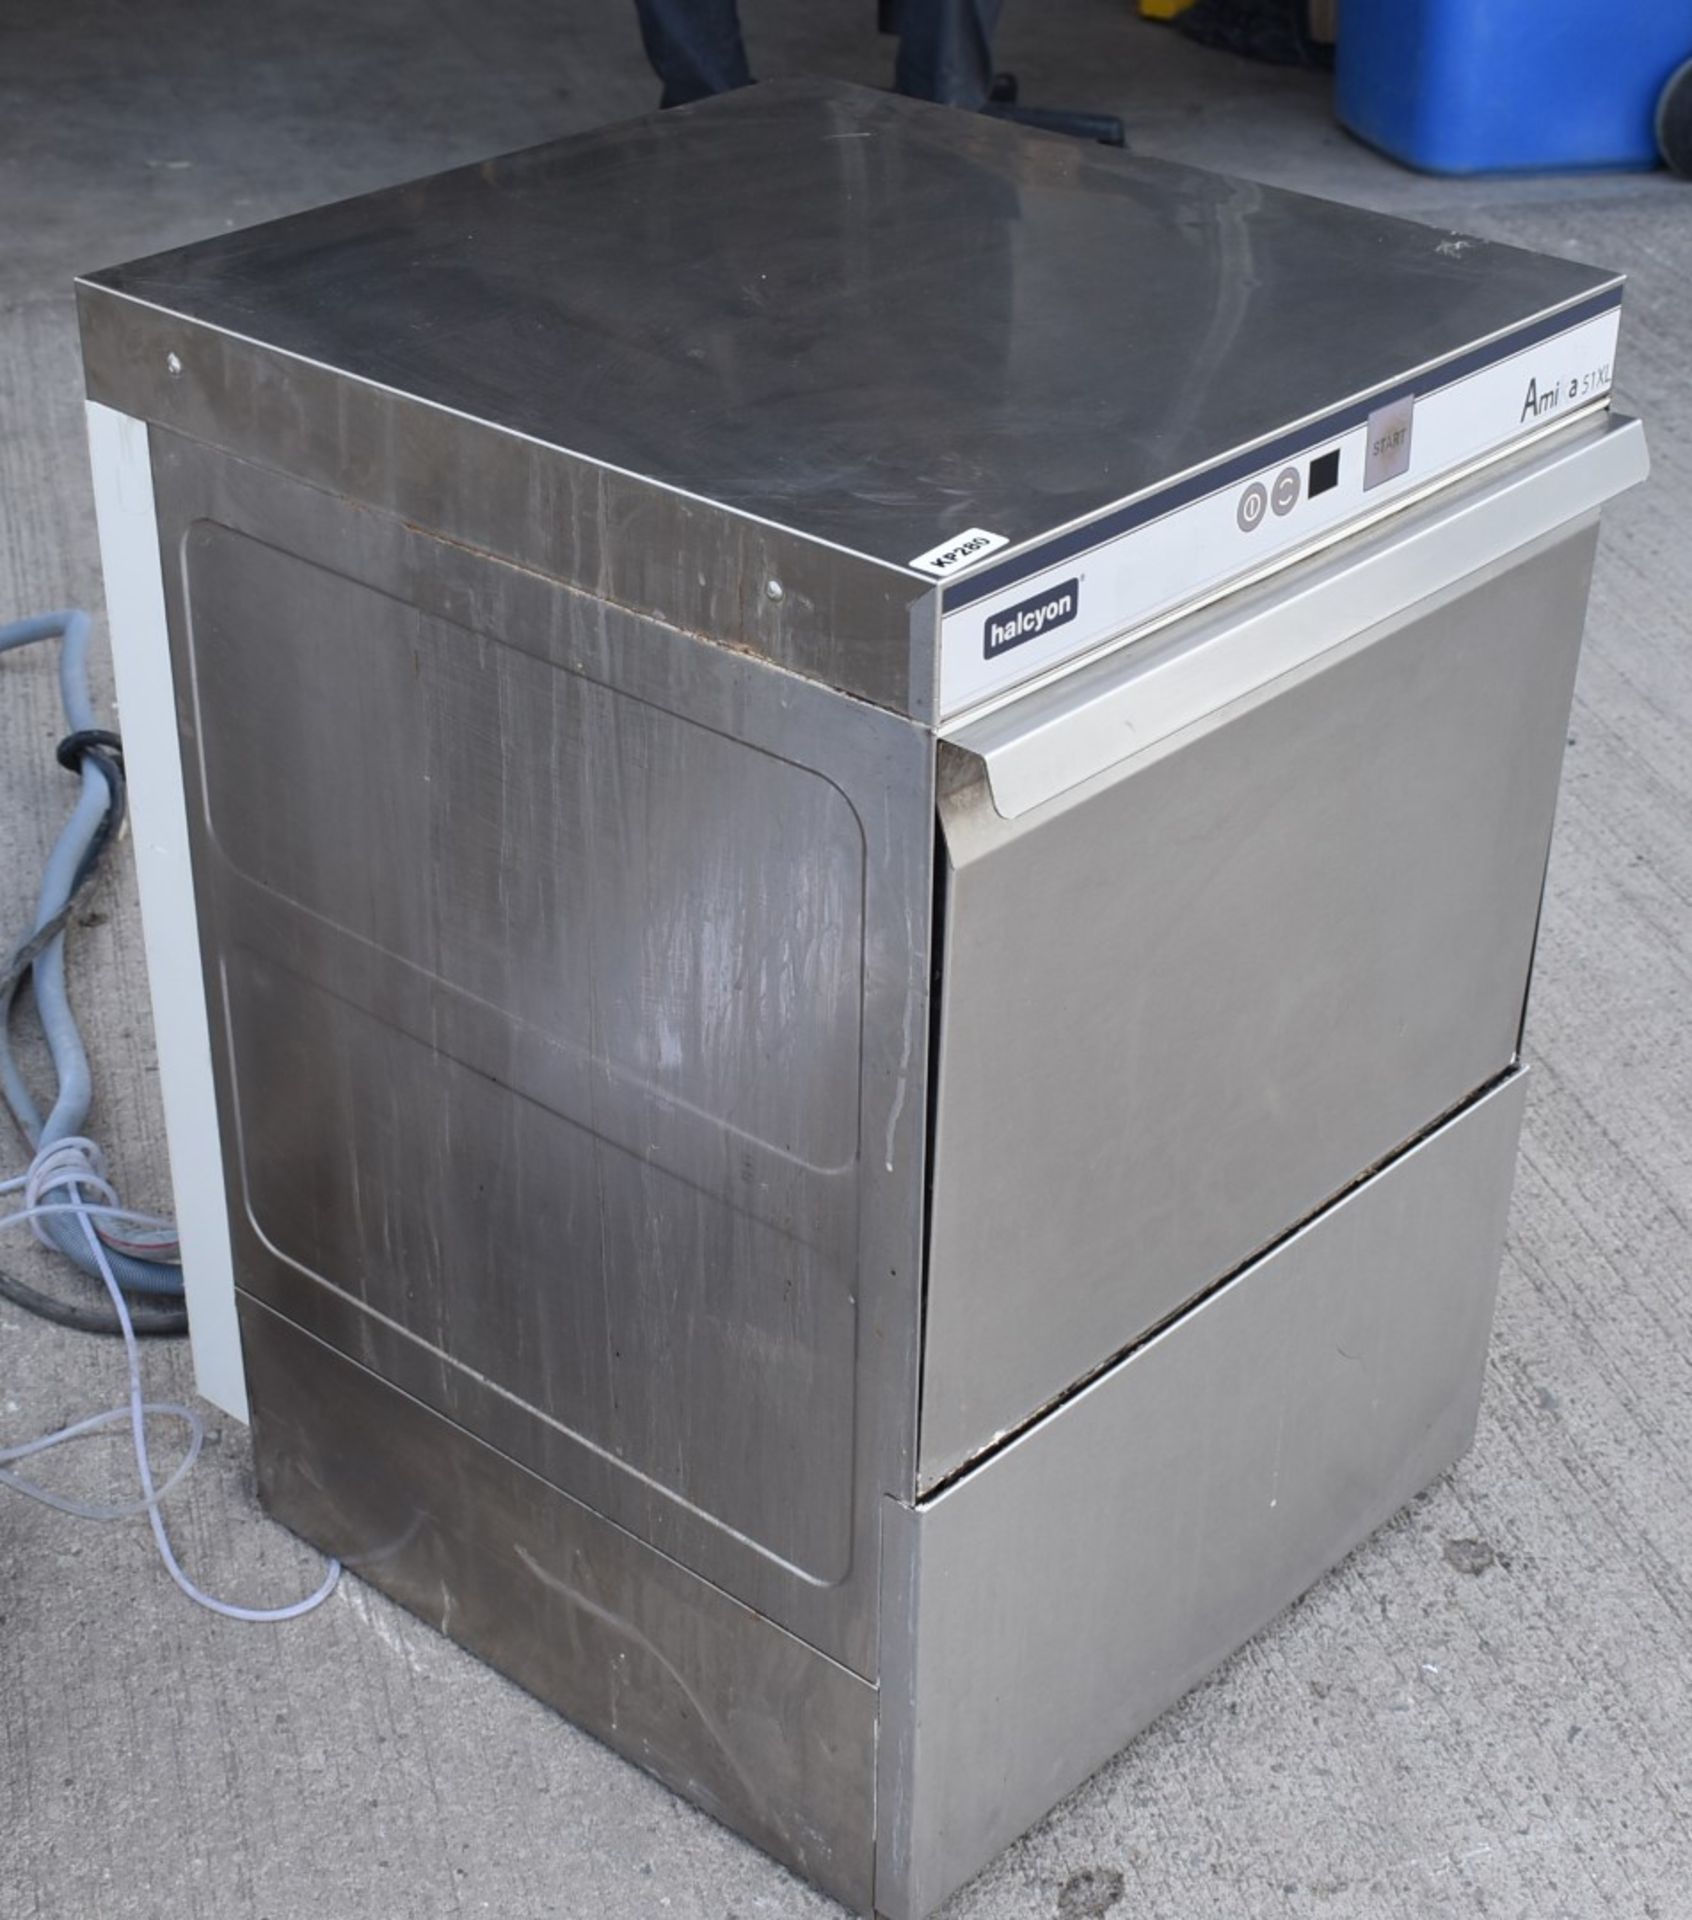 1 x Maidaid Amika 51XL Commercial Undercounter Dishwasher - 230V - 500x500mm Rack Size - Stainless - Image 5 of 7